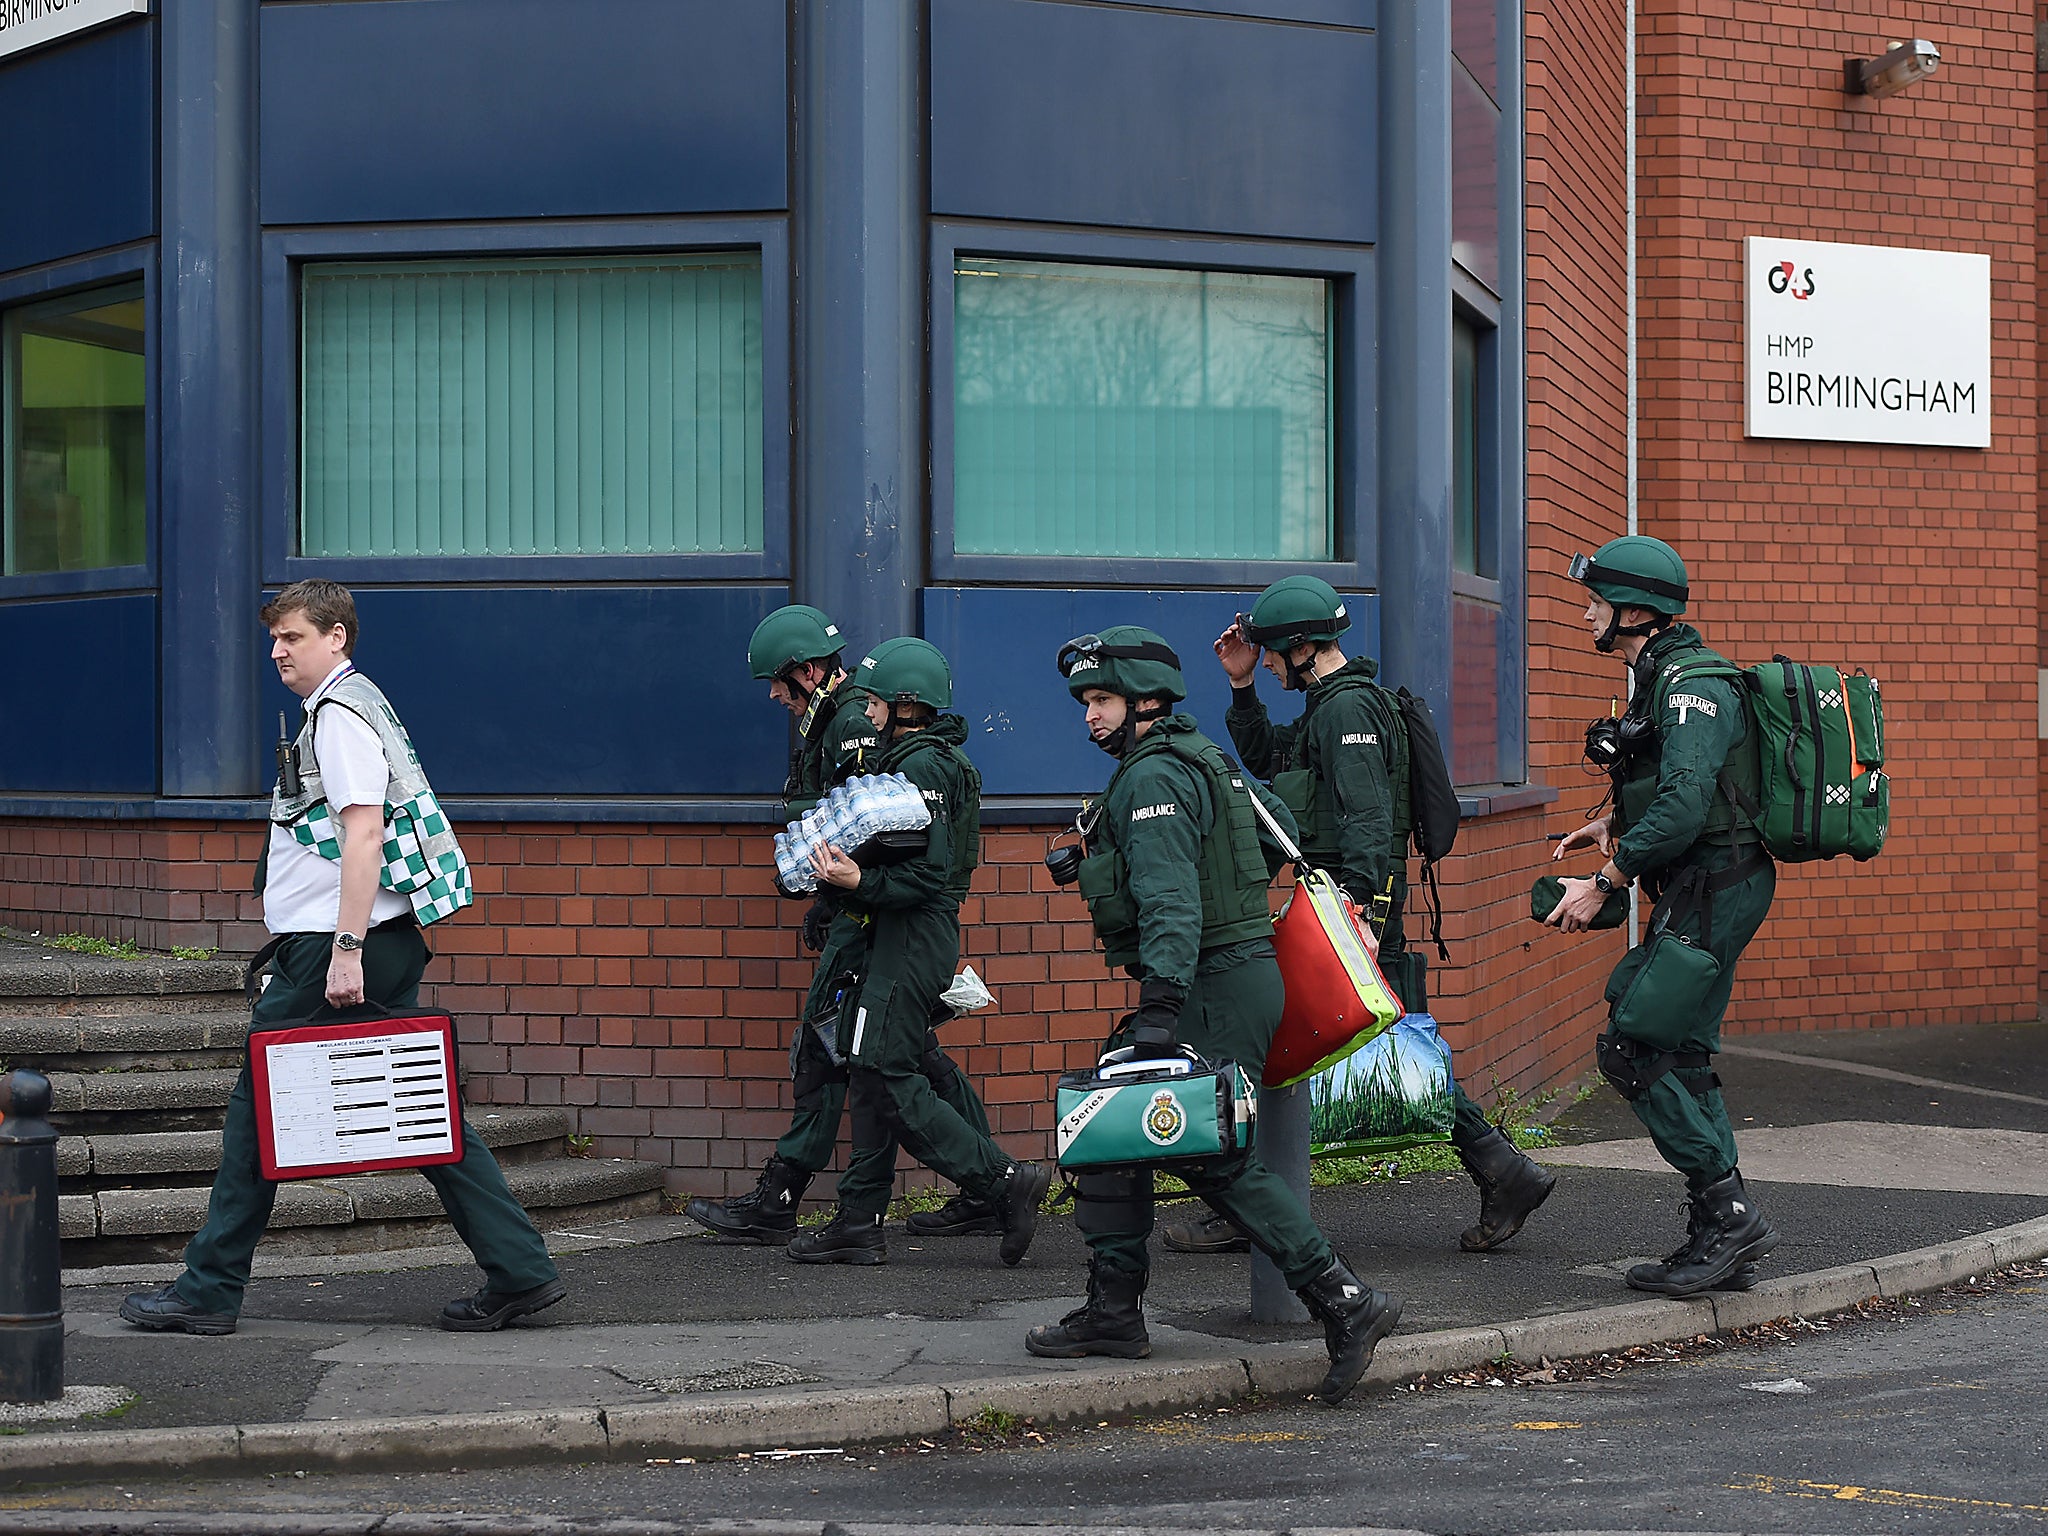 HMP Birmingham riot 240 prisoners transferred from jail following disturbance The Independent The Independent